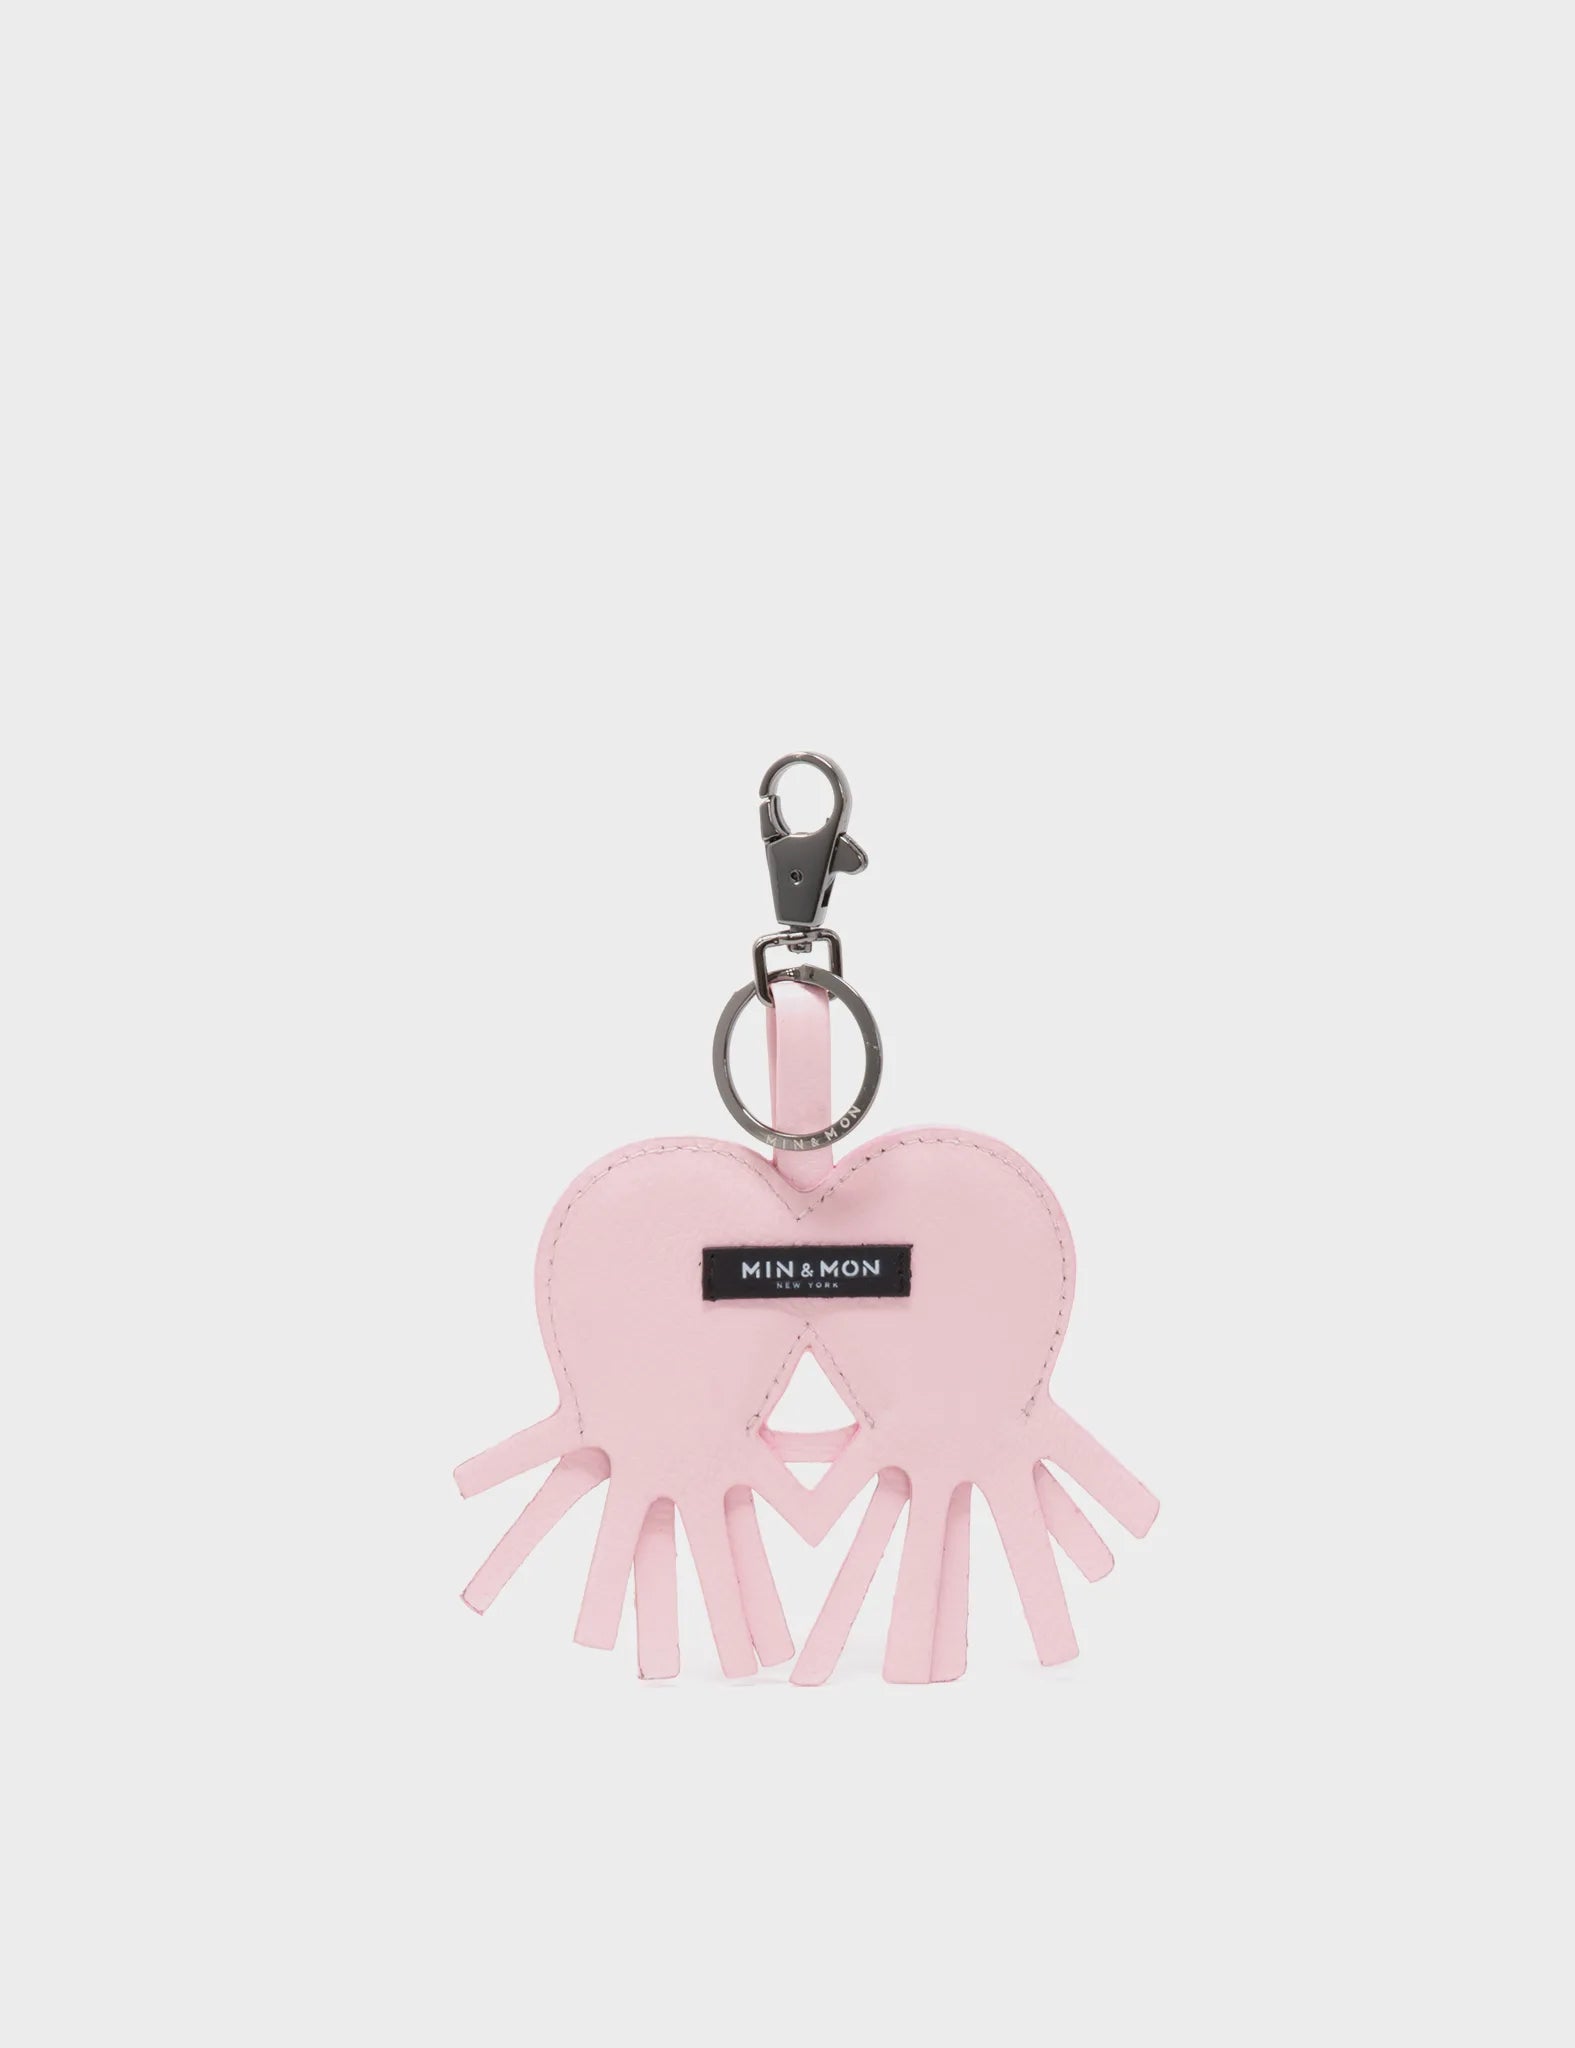 Octopus twins Charm - Blush Pink Leather Keychain - Back 